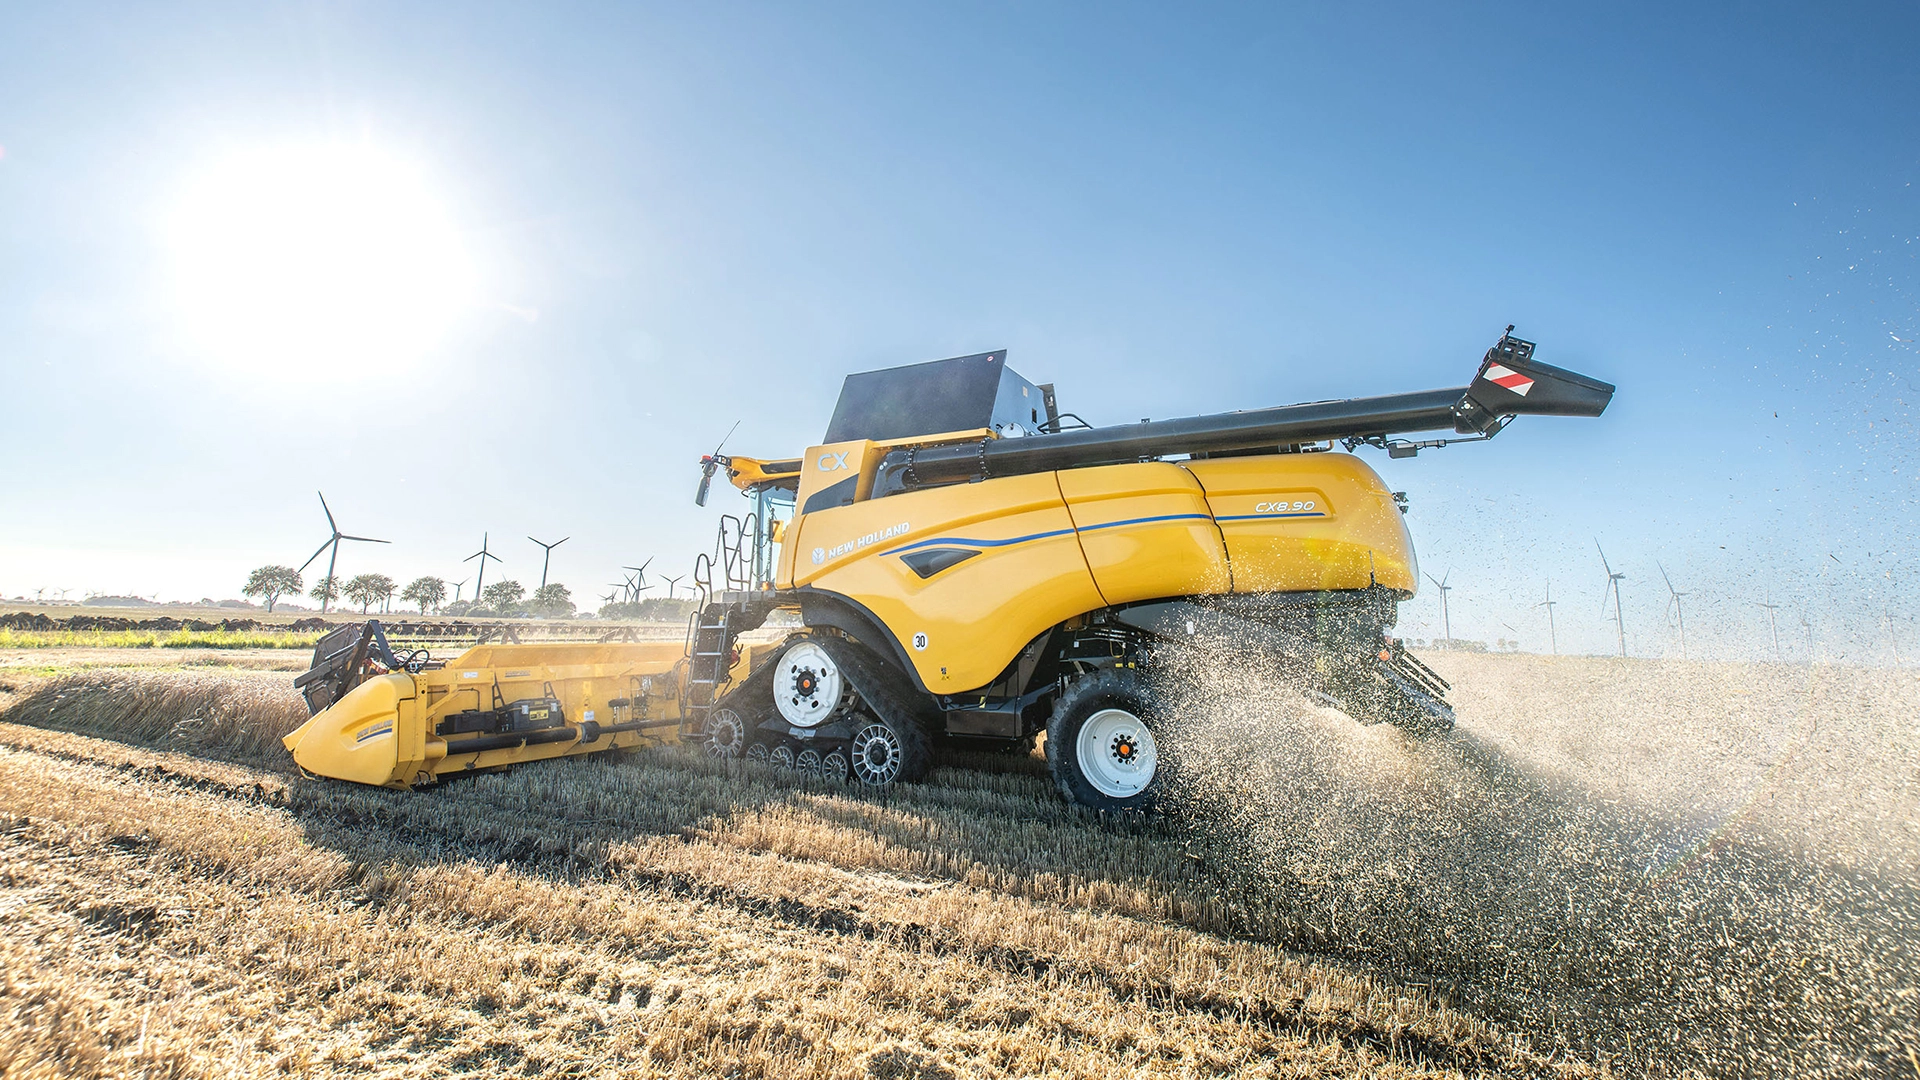 CX7 ＆ CX8 Combine Harvesters in action